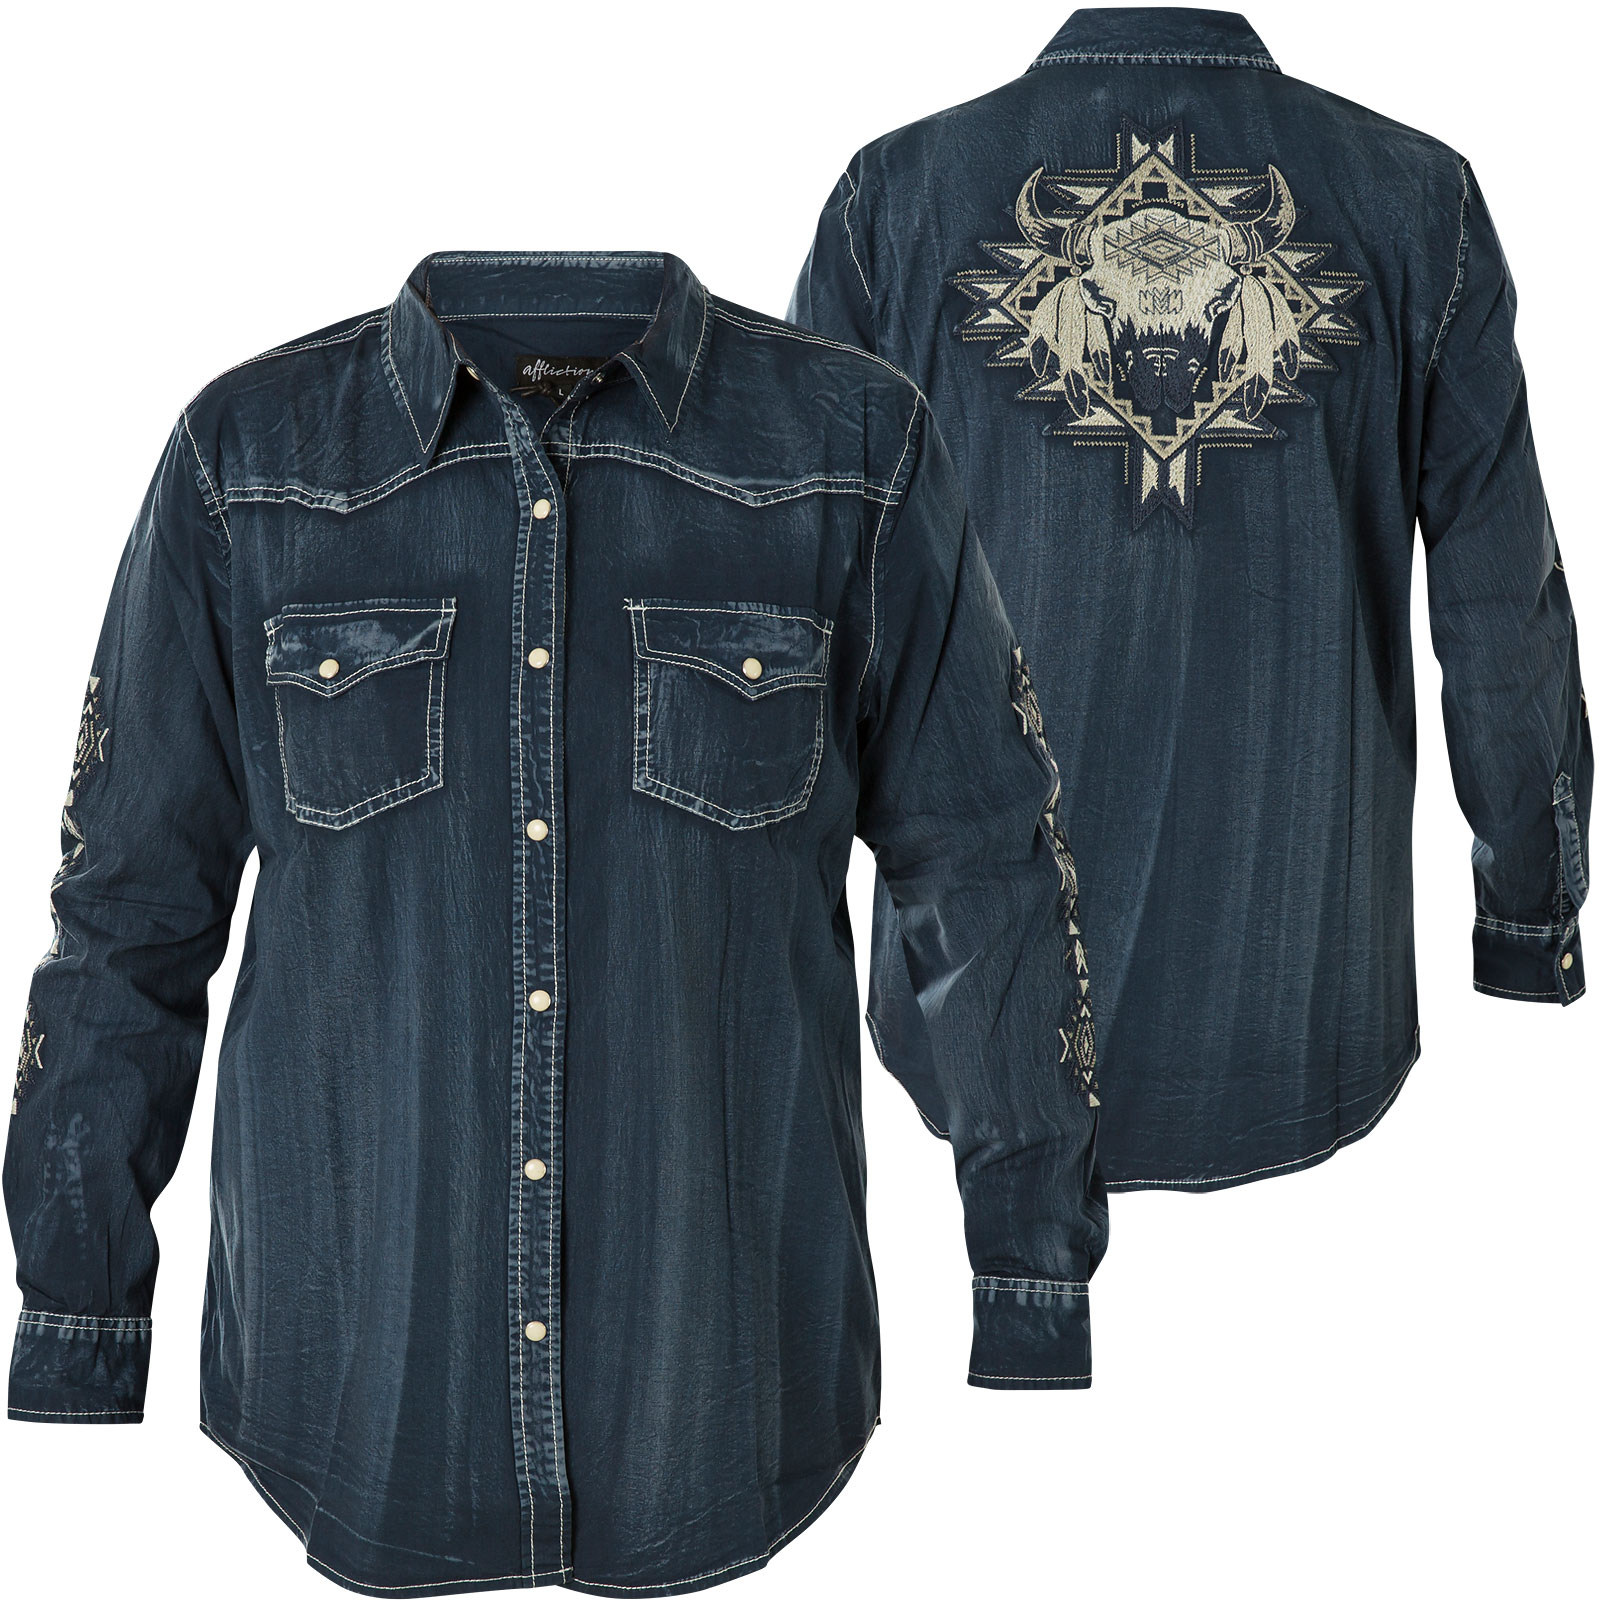 Affliction Albatross Button-down with animal head